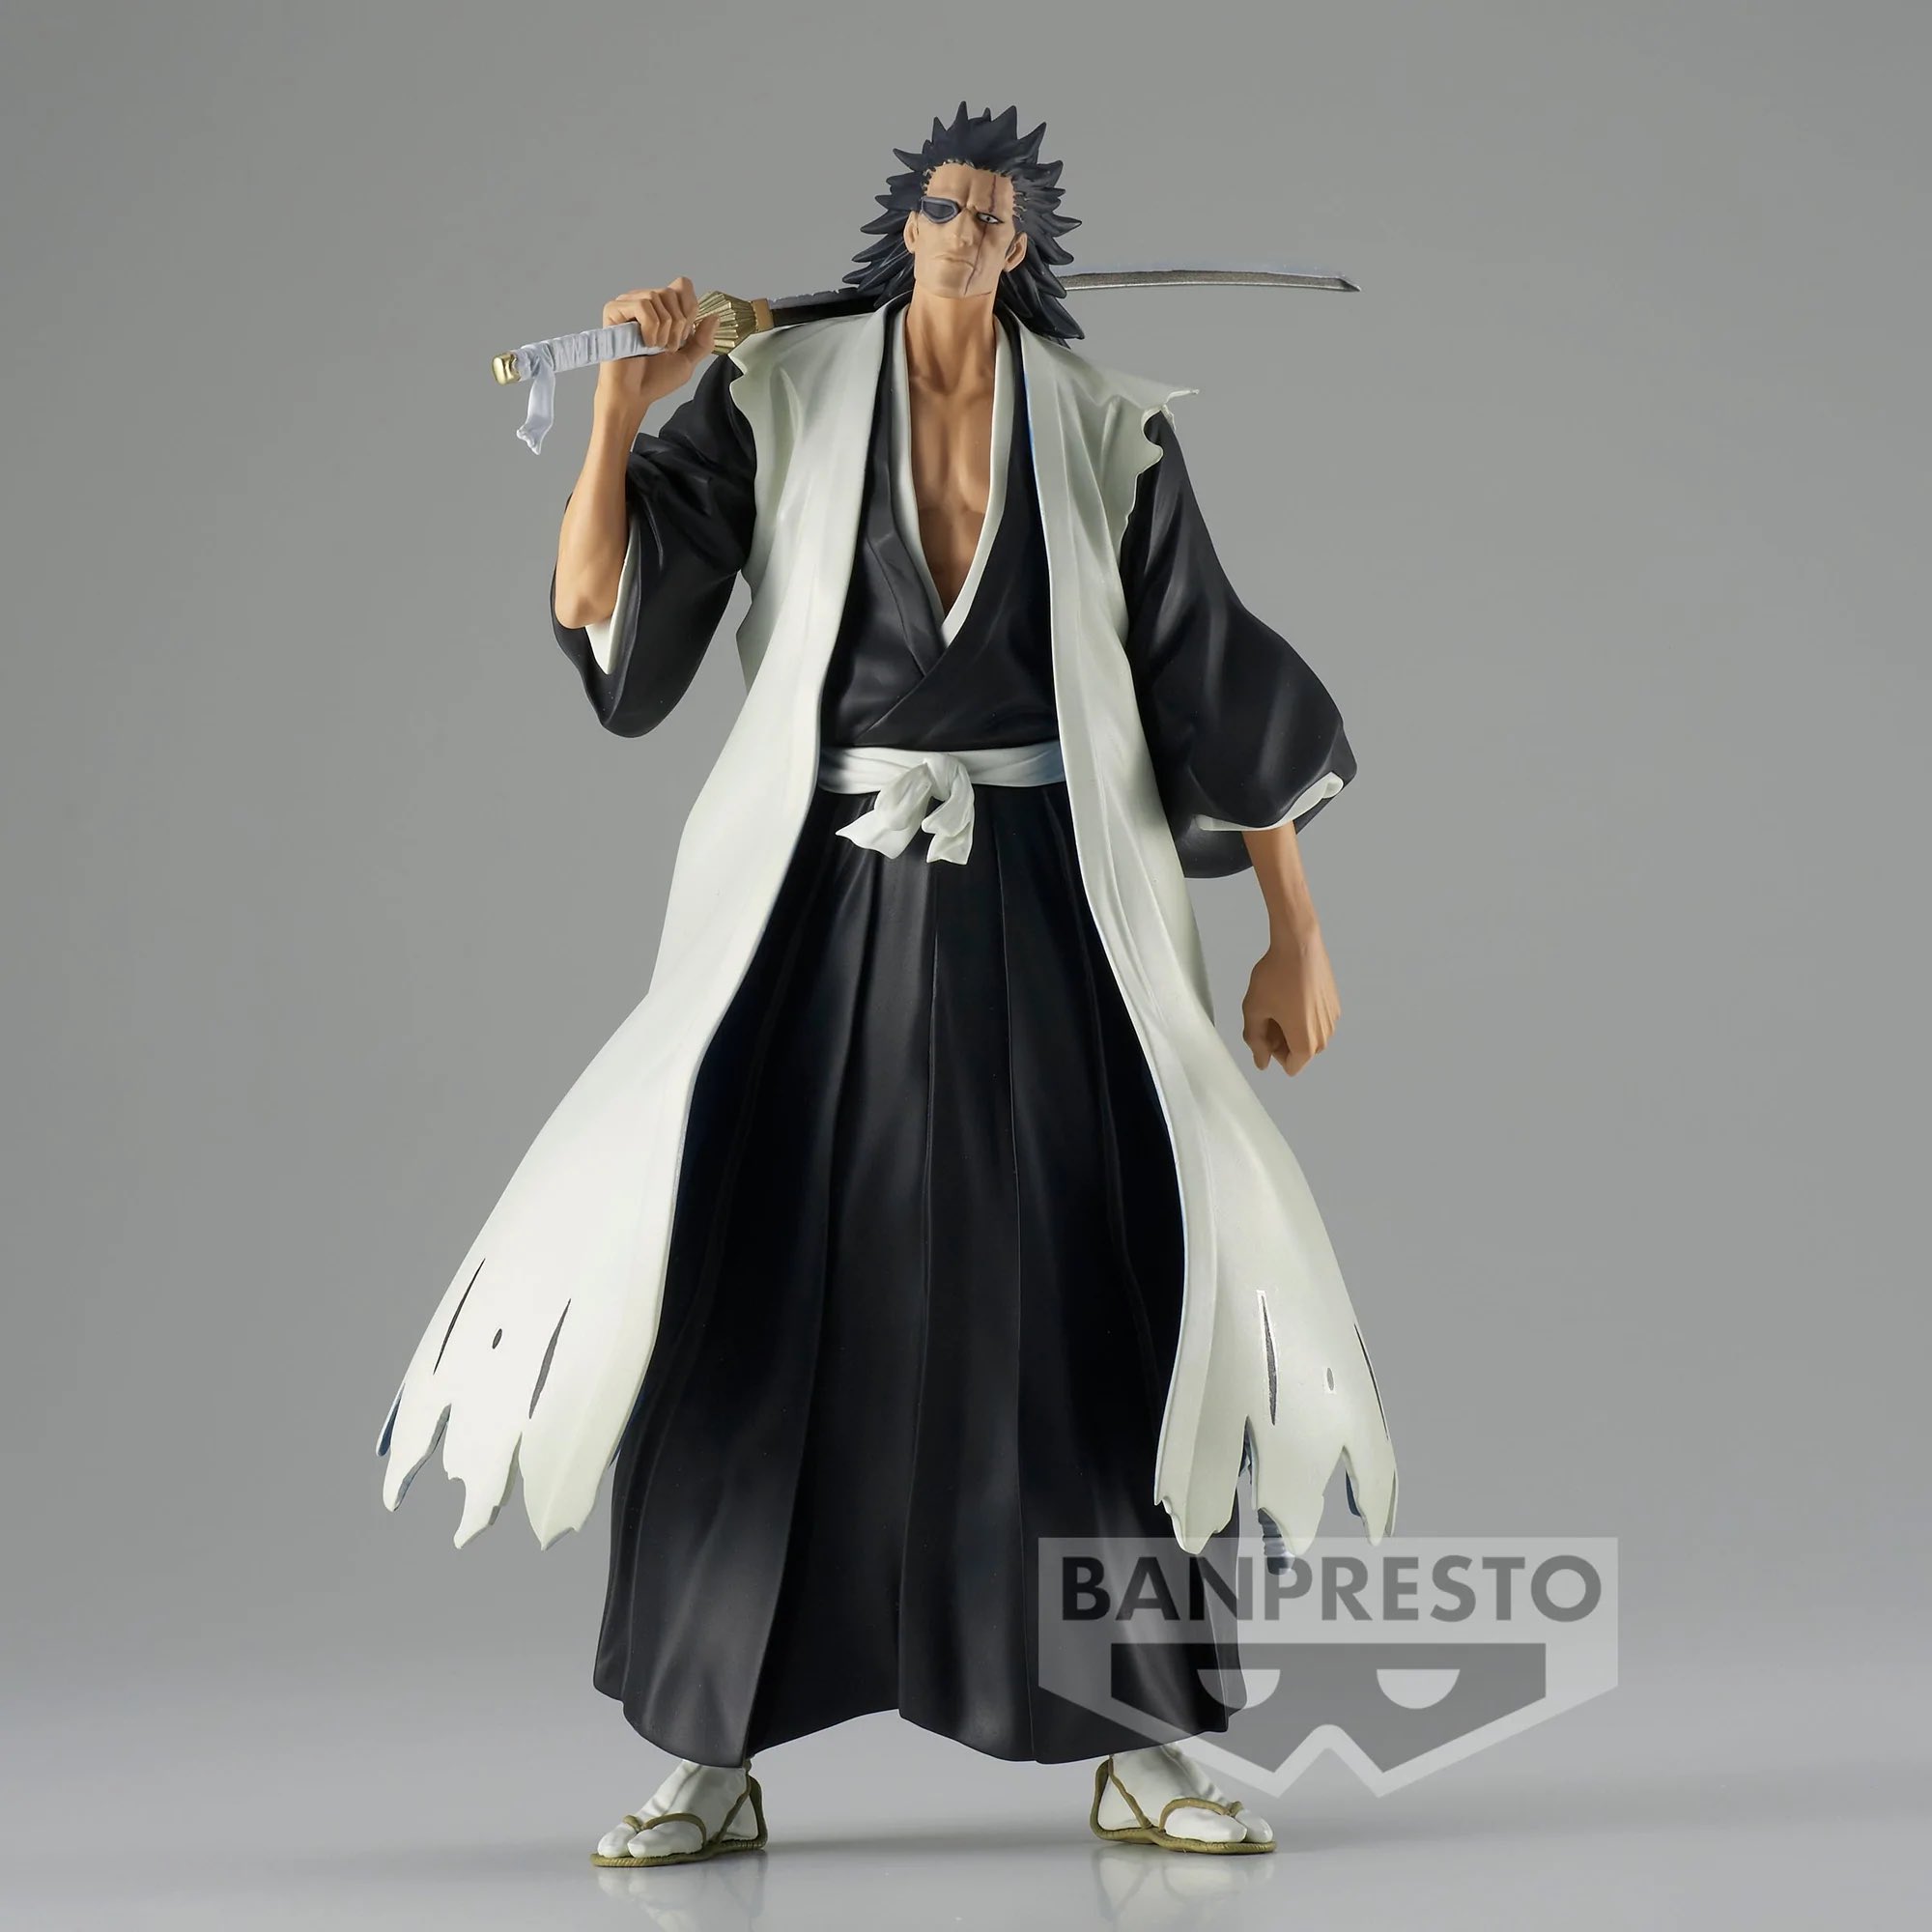 BLEACH 更木 剣八 グッズ まとめ売り - tbitsglobal.com